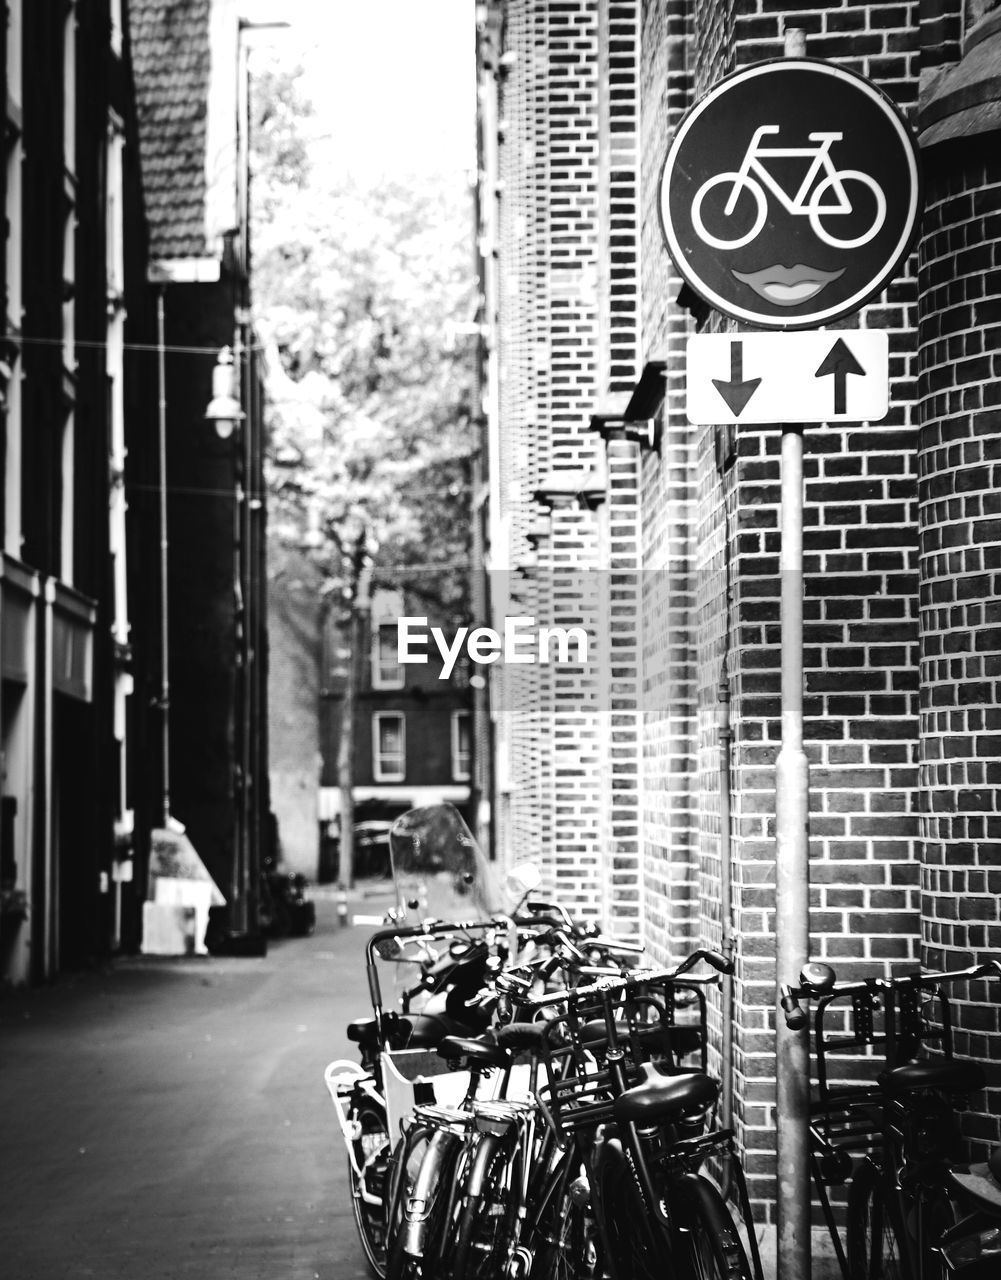 Bicycles parked on street amidst buildings